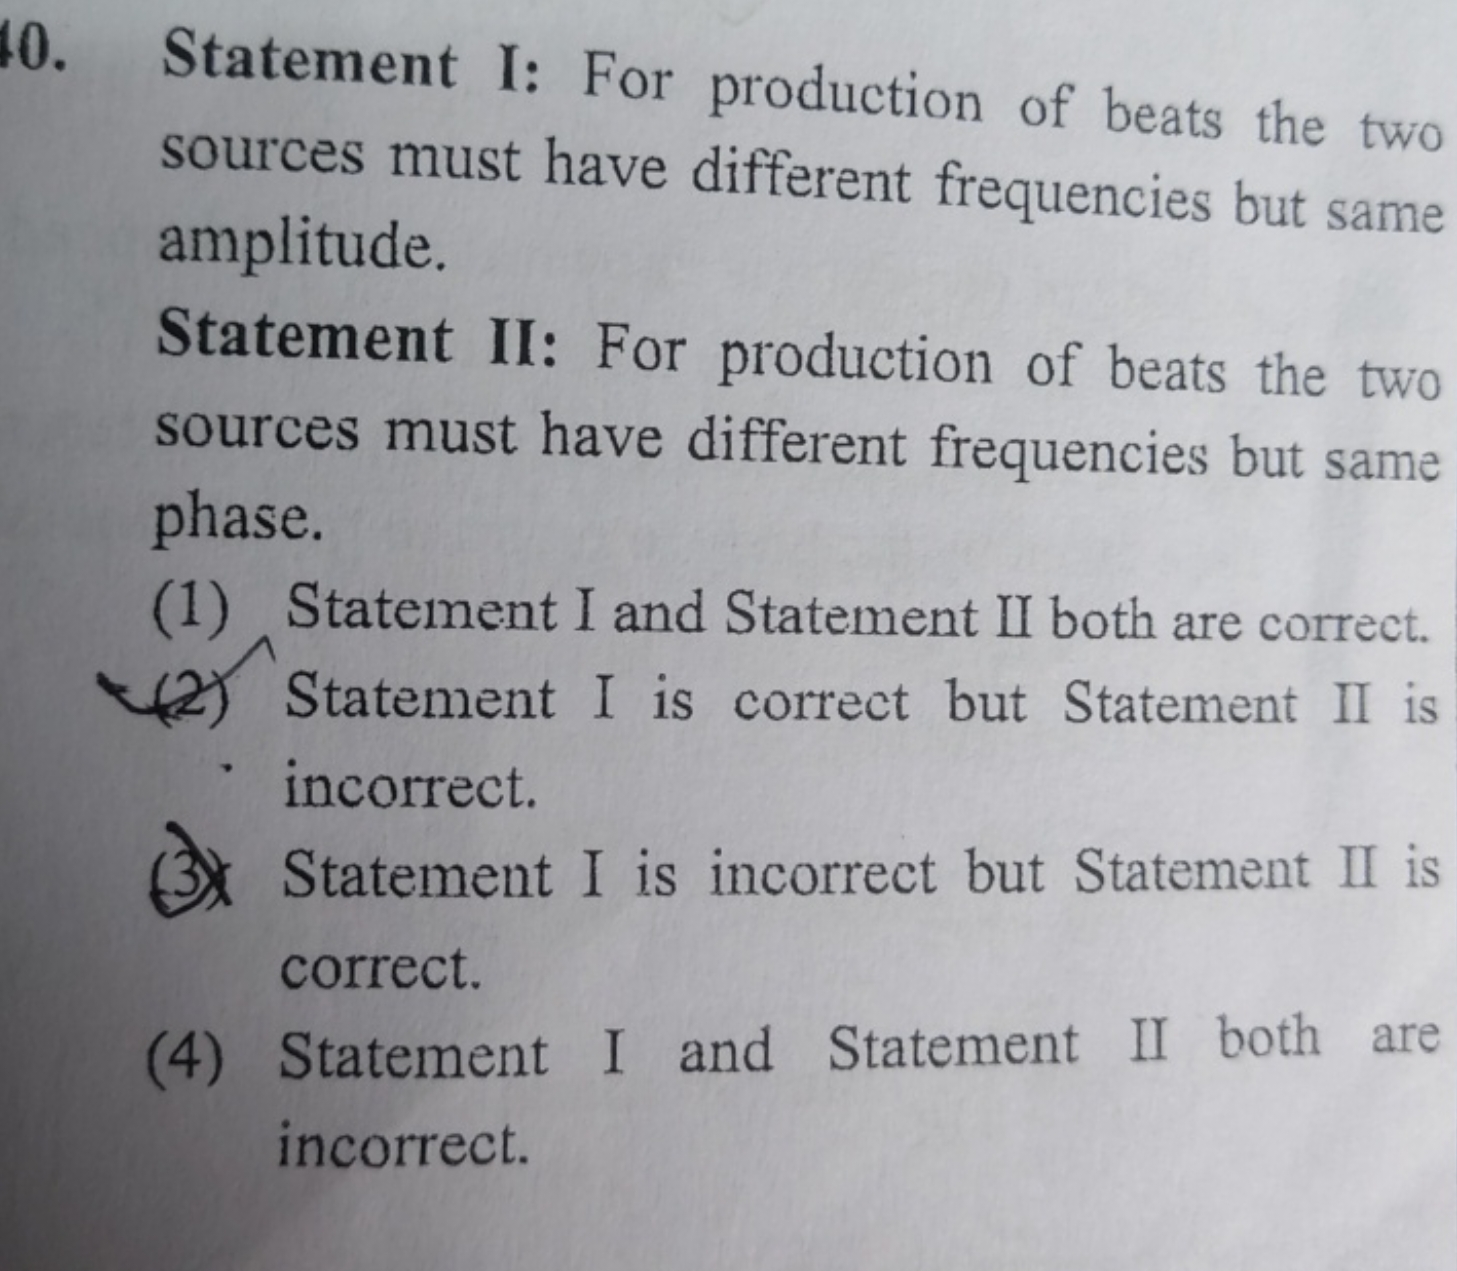 Statement I: For production of beats the two sources must have differe